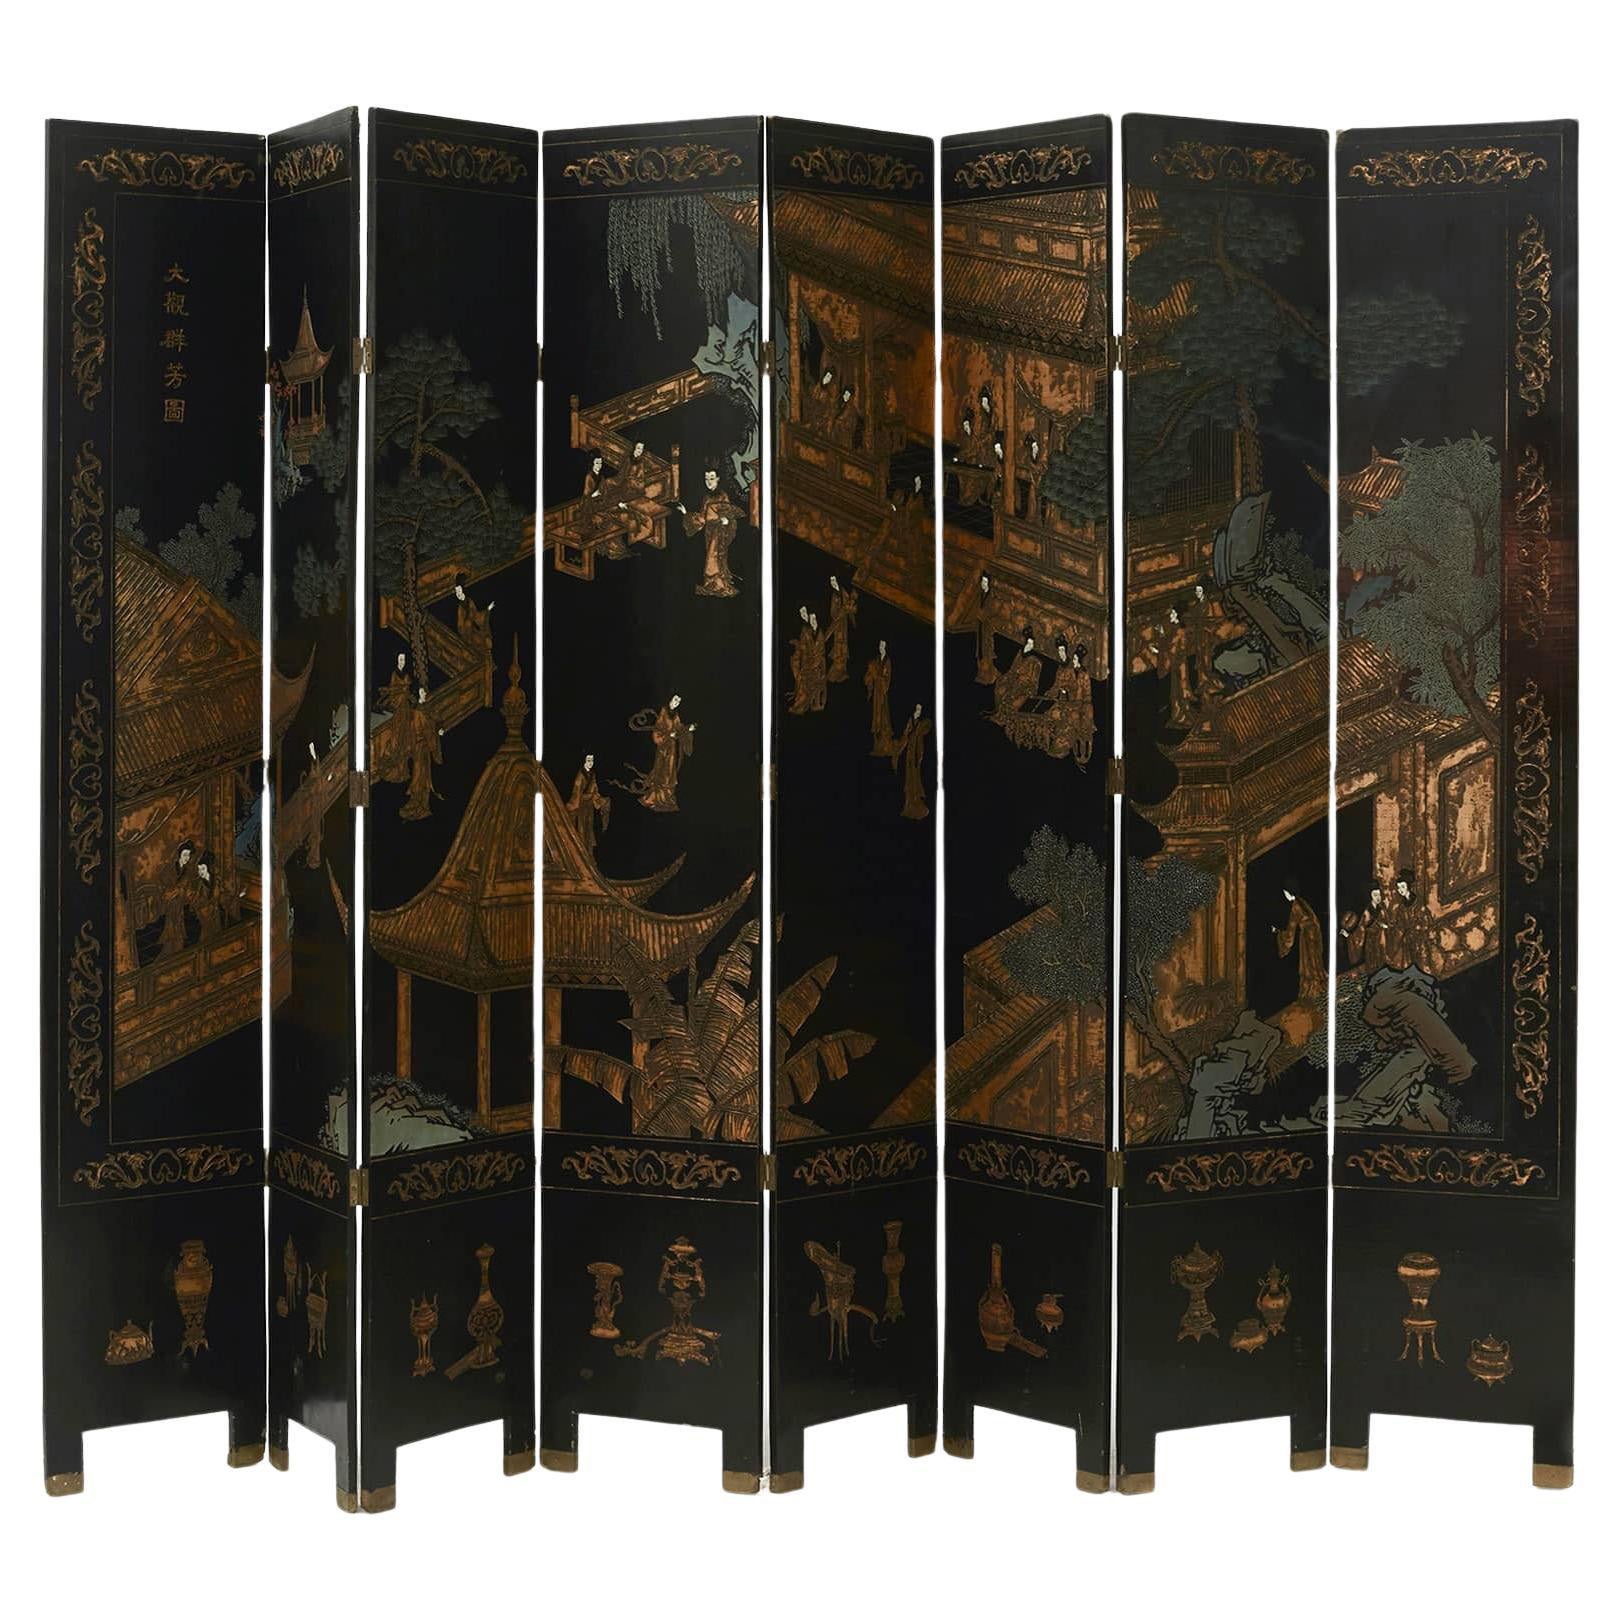 Chinese Export Eight-Fold Lacquered Screen